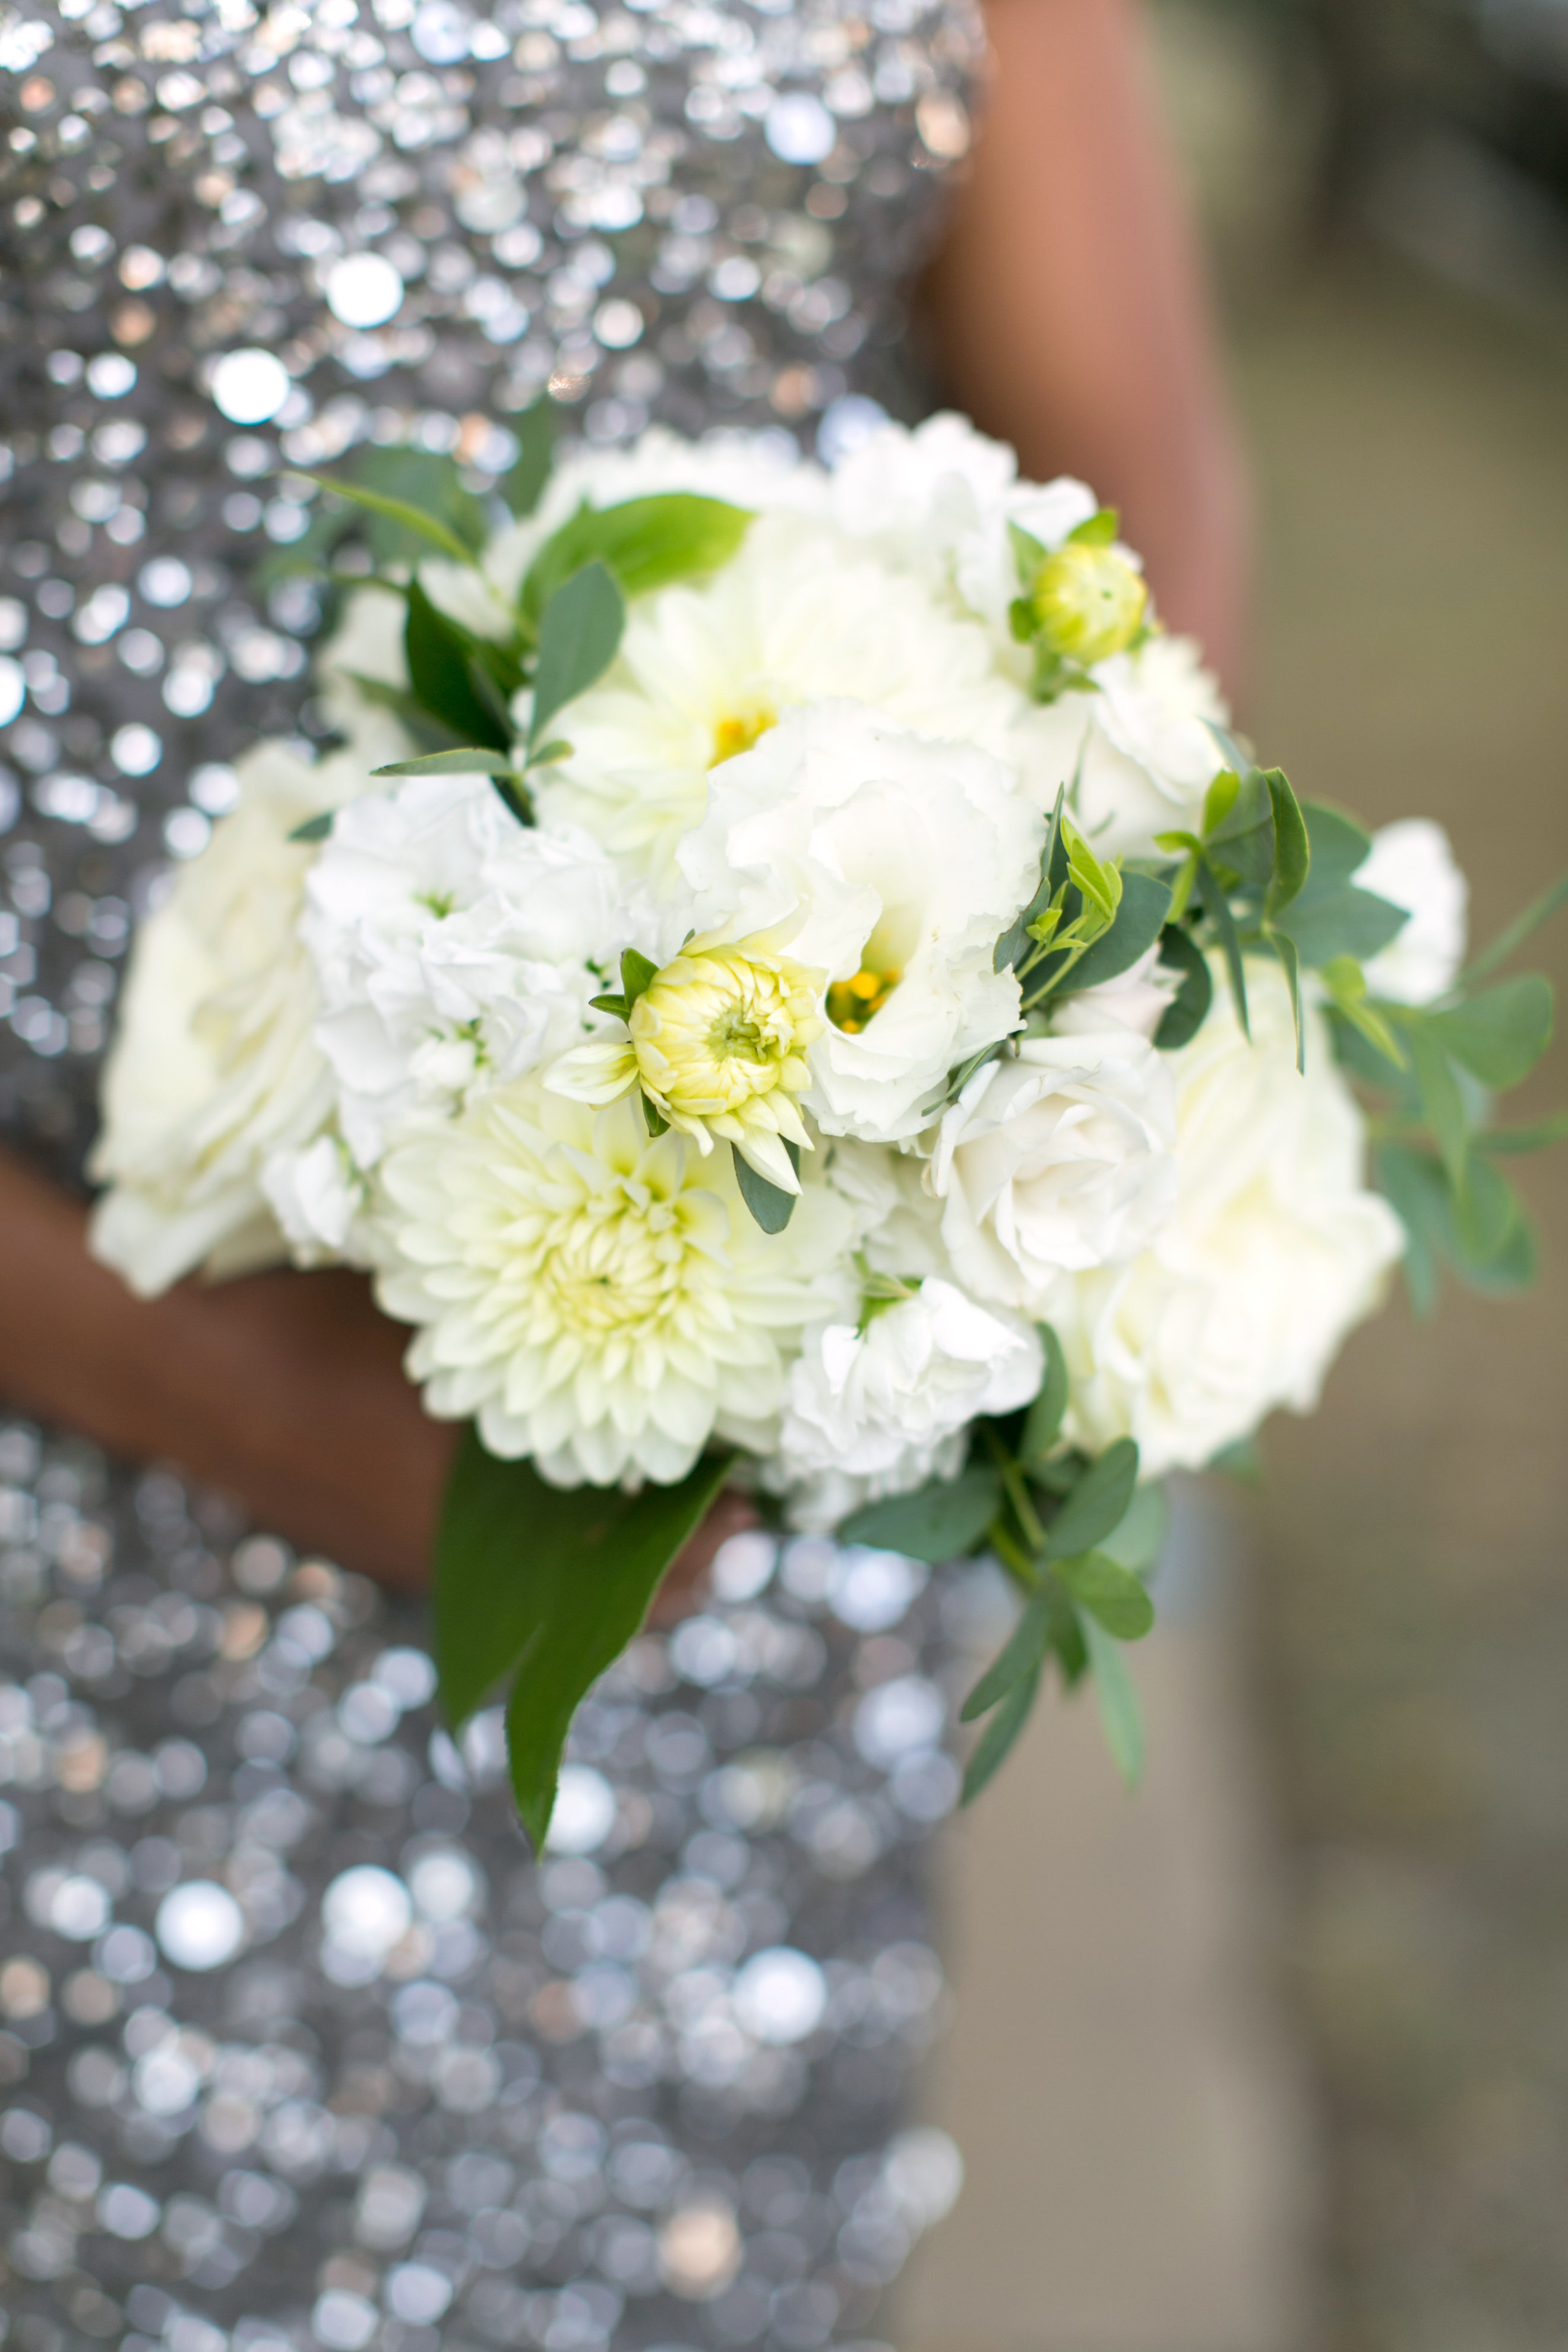 White and golden bridesmaid's bouquet with silver sequined dress.